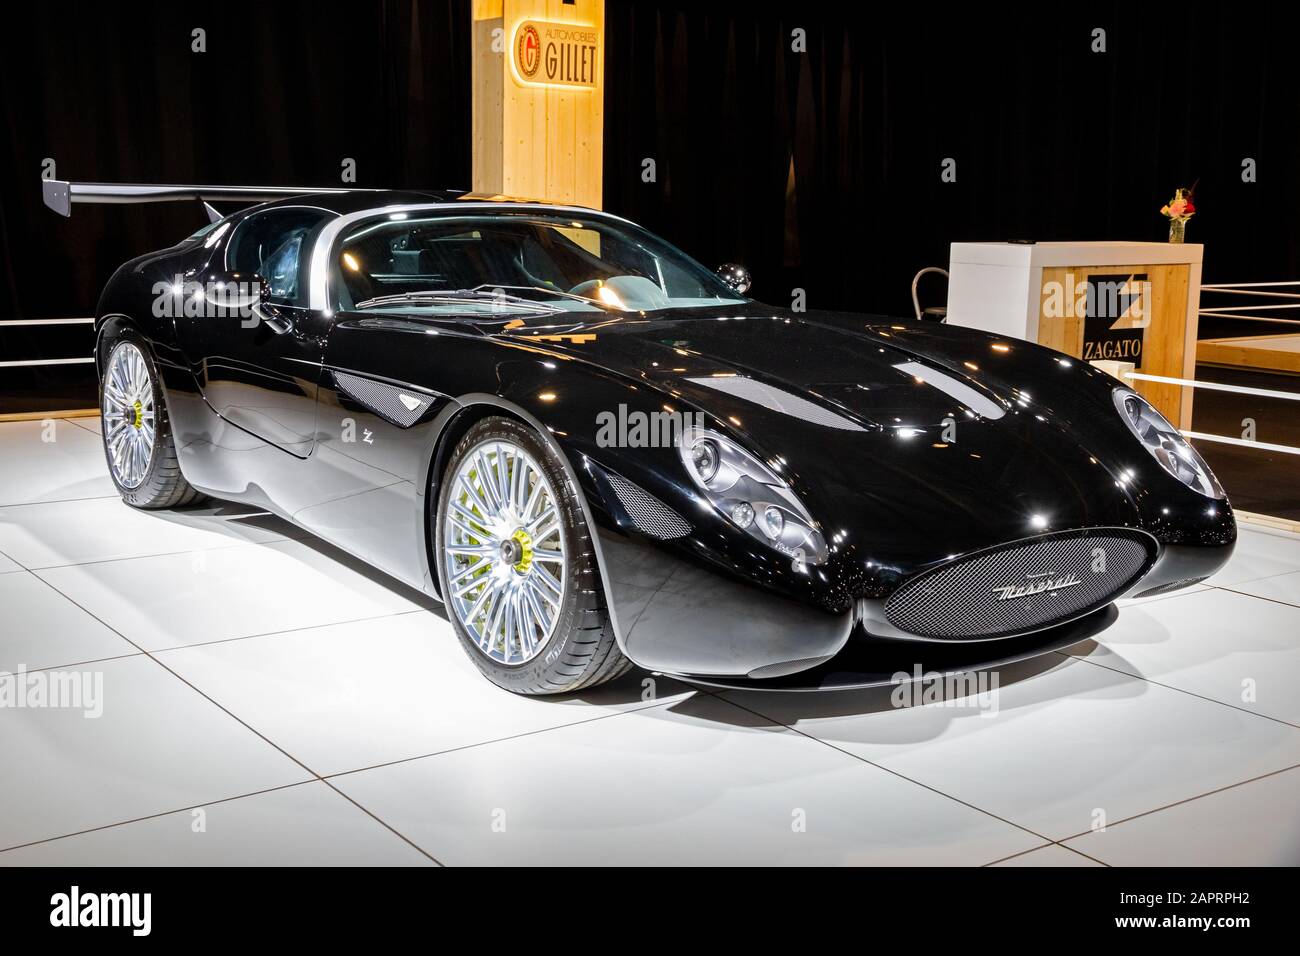 BRUSSELS - JAN 9, 2020: Zagato Mostro sports car, powered by MASERATI,  showcased at the Brussels Autosalon 2020 Motor Show Stock Photo - Alamy